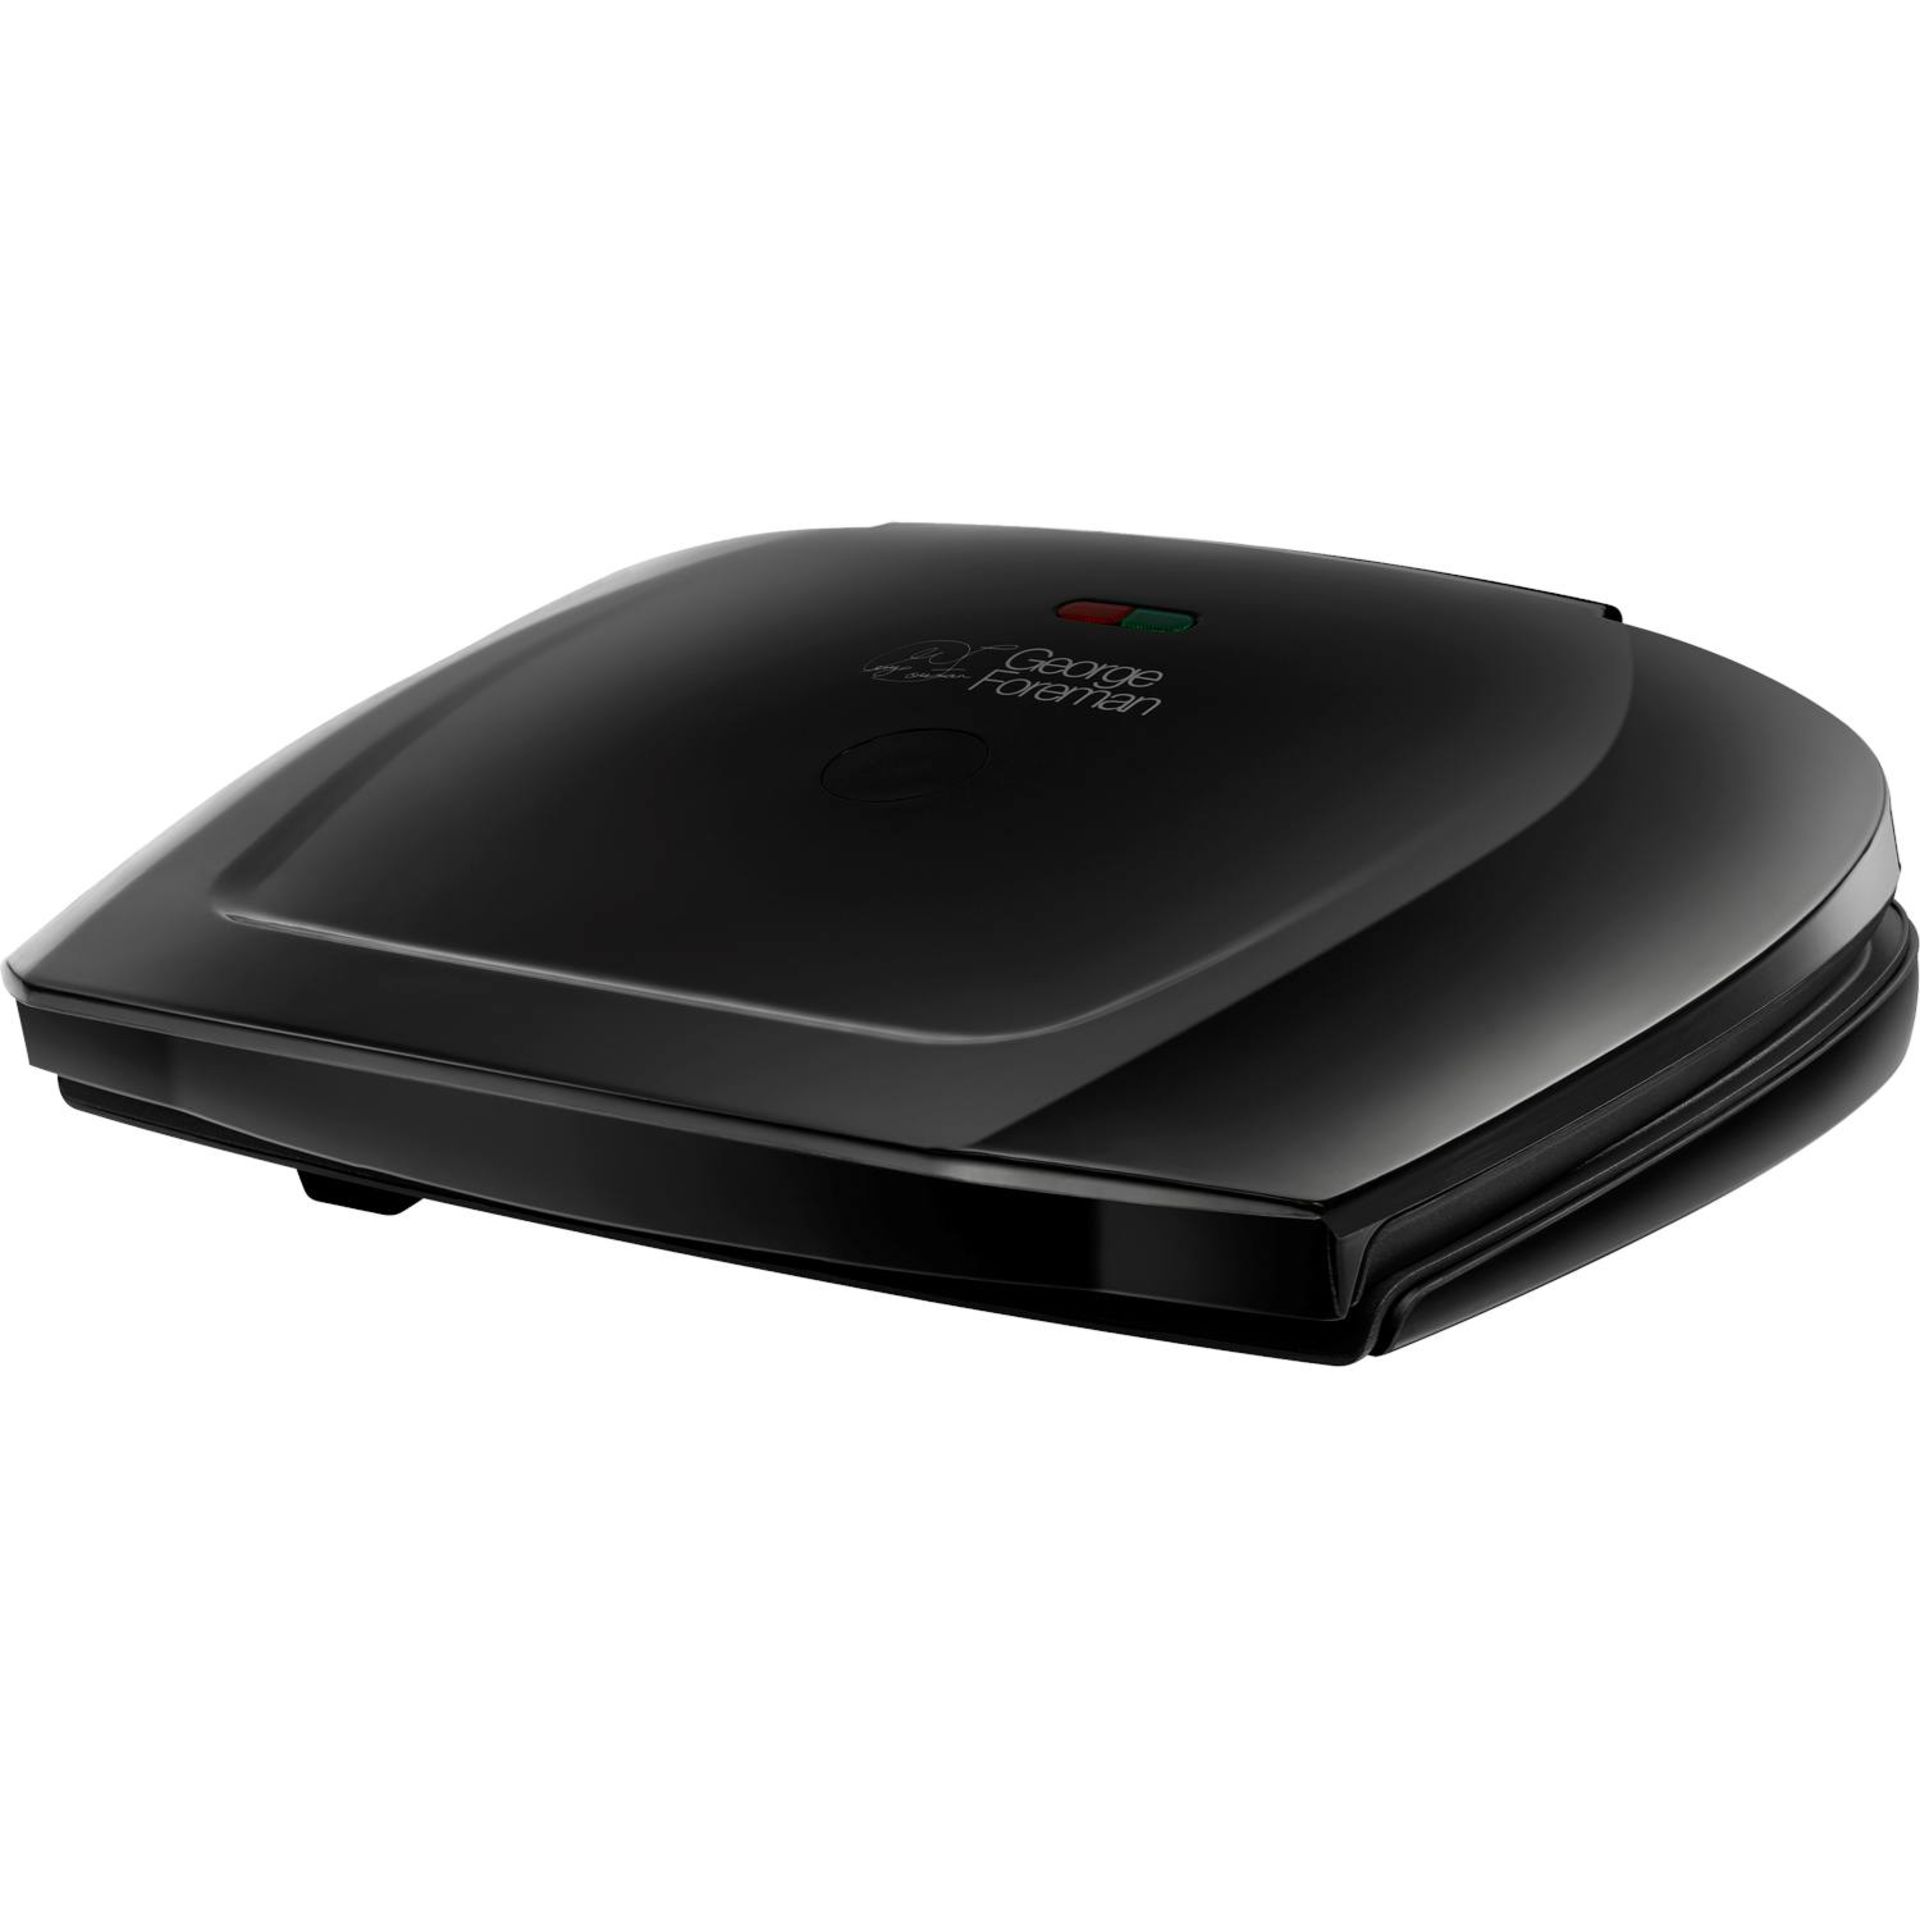 V Brand New George Foreman 10 Portion Fat Reducing Healthy Grill ISP £47.99 (Studio)